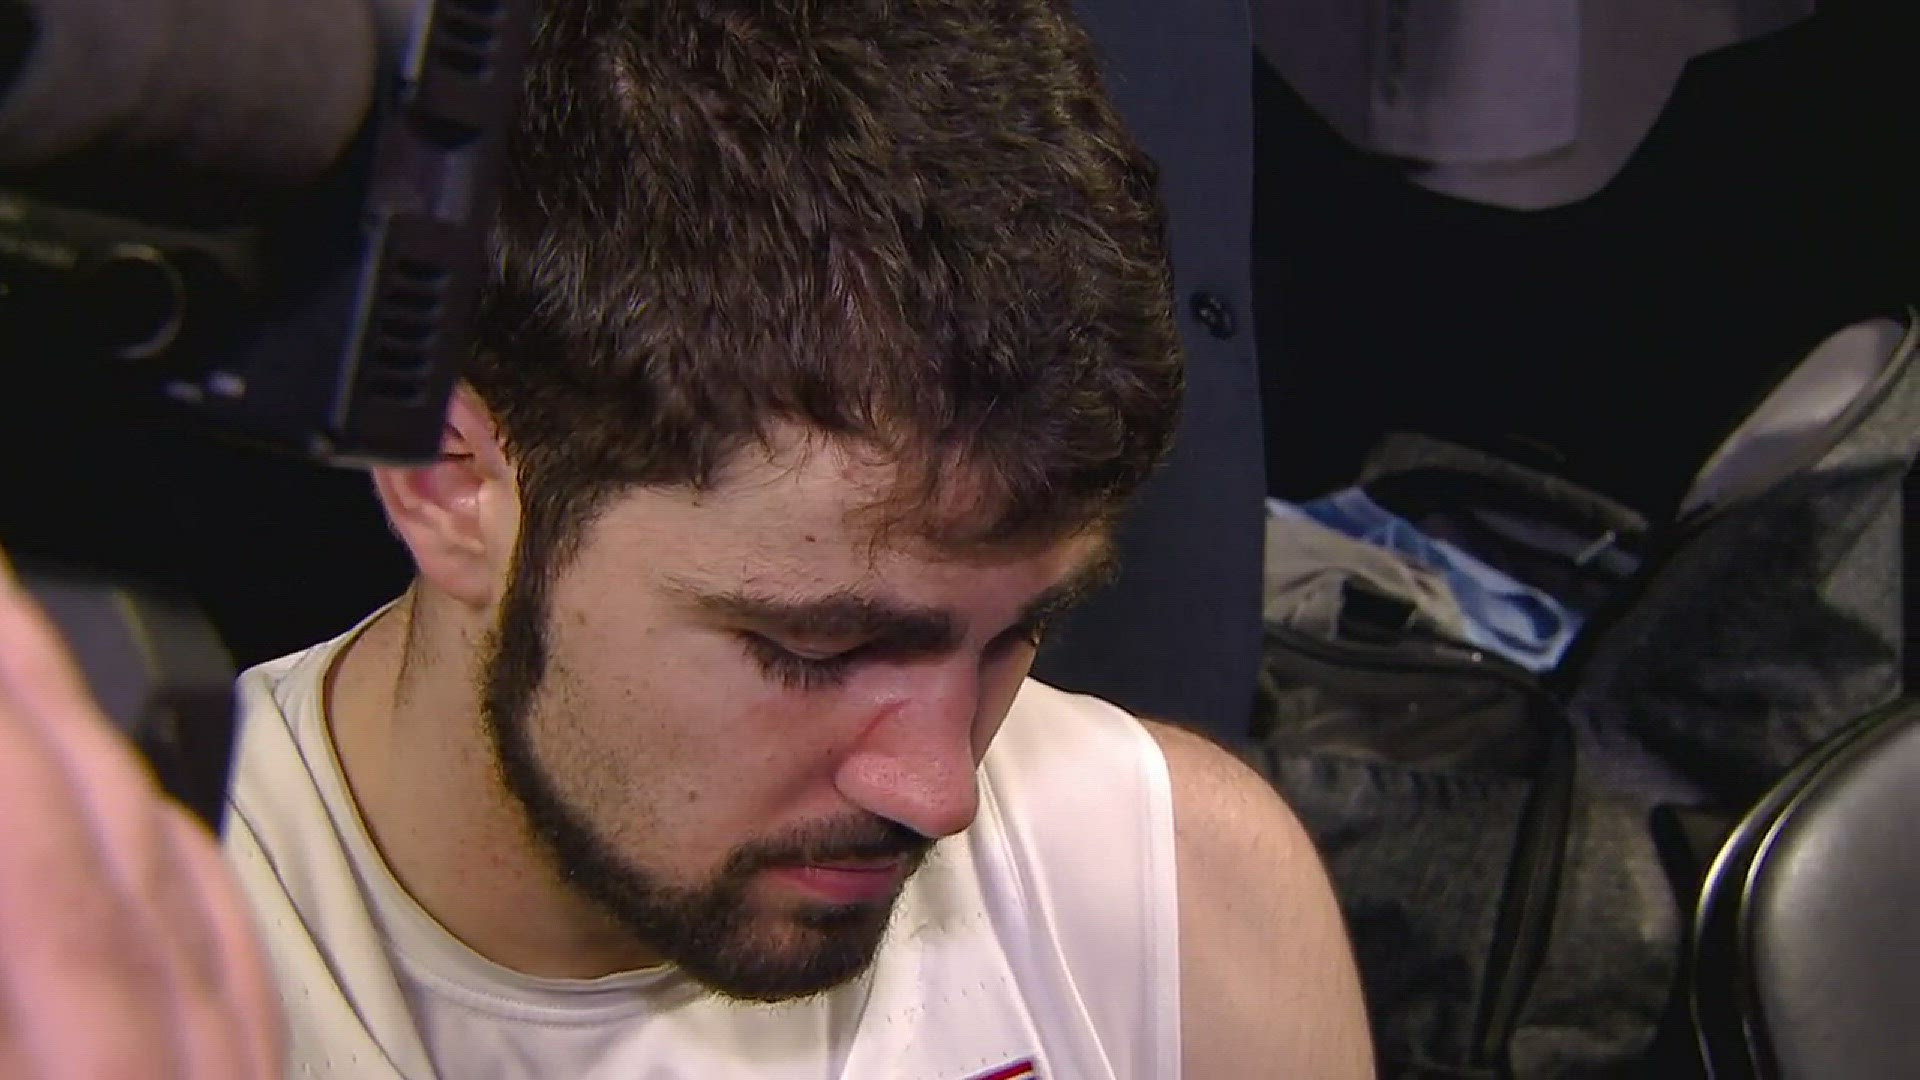 Postgame Interview With UNC's Luke Maye